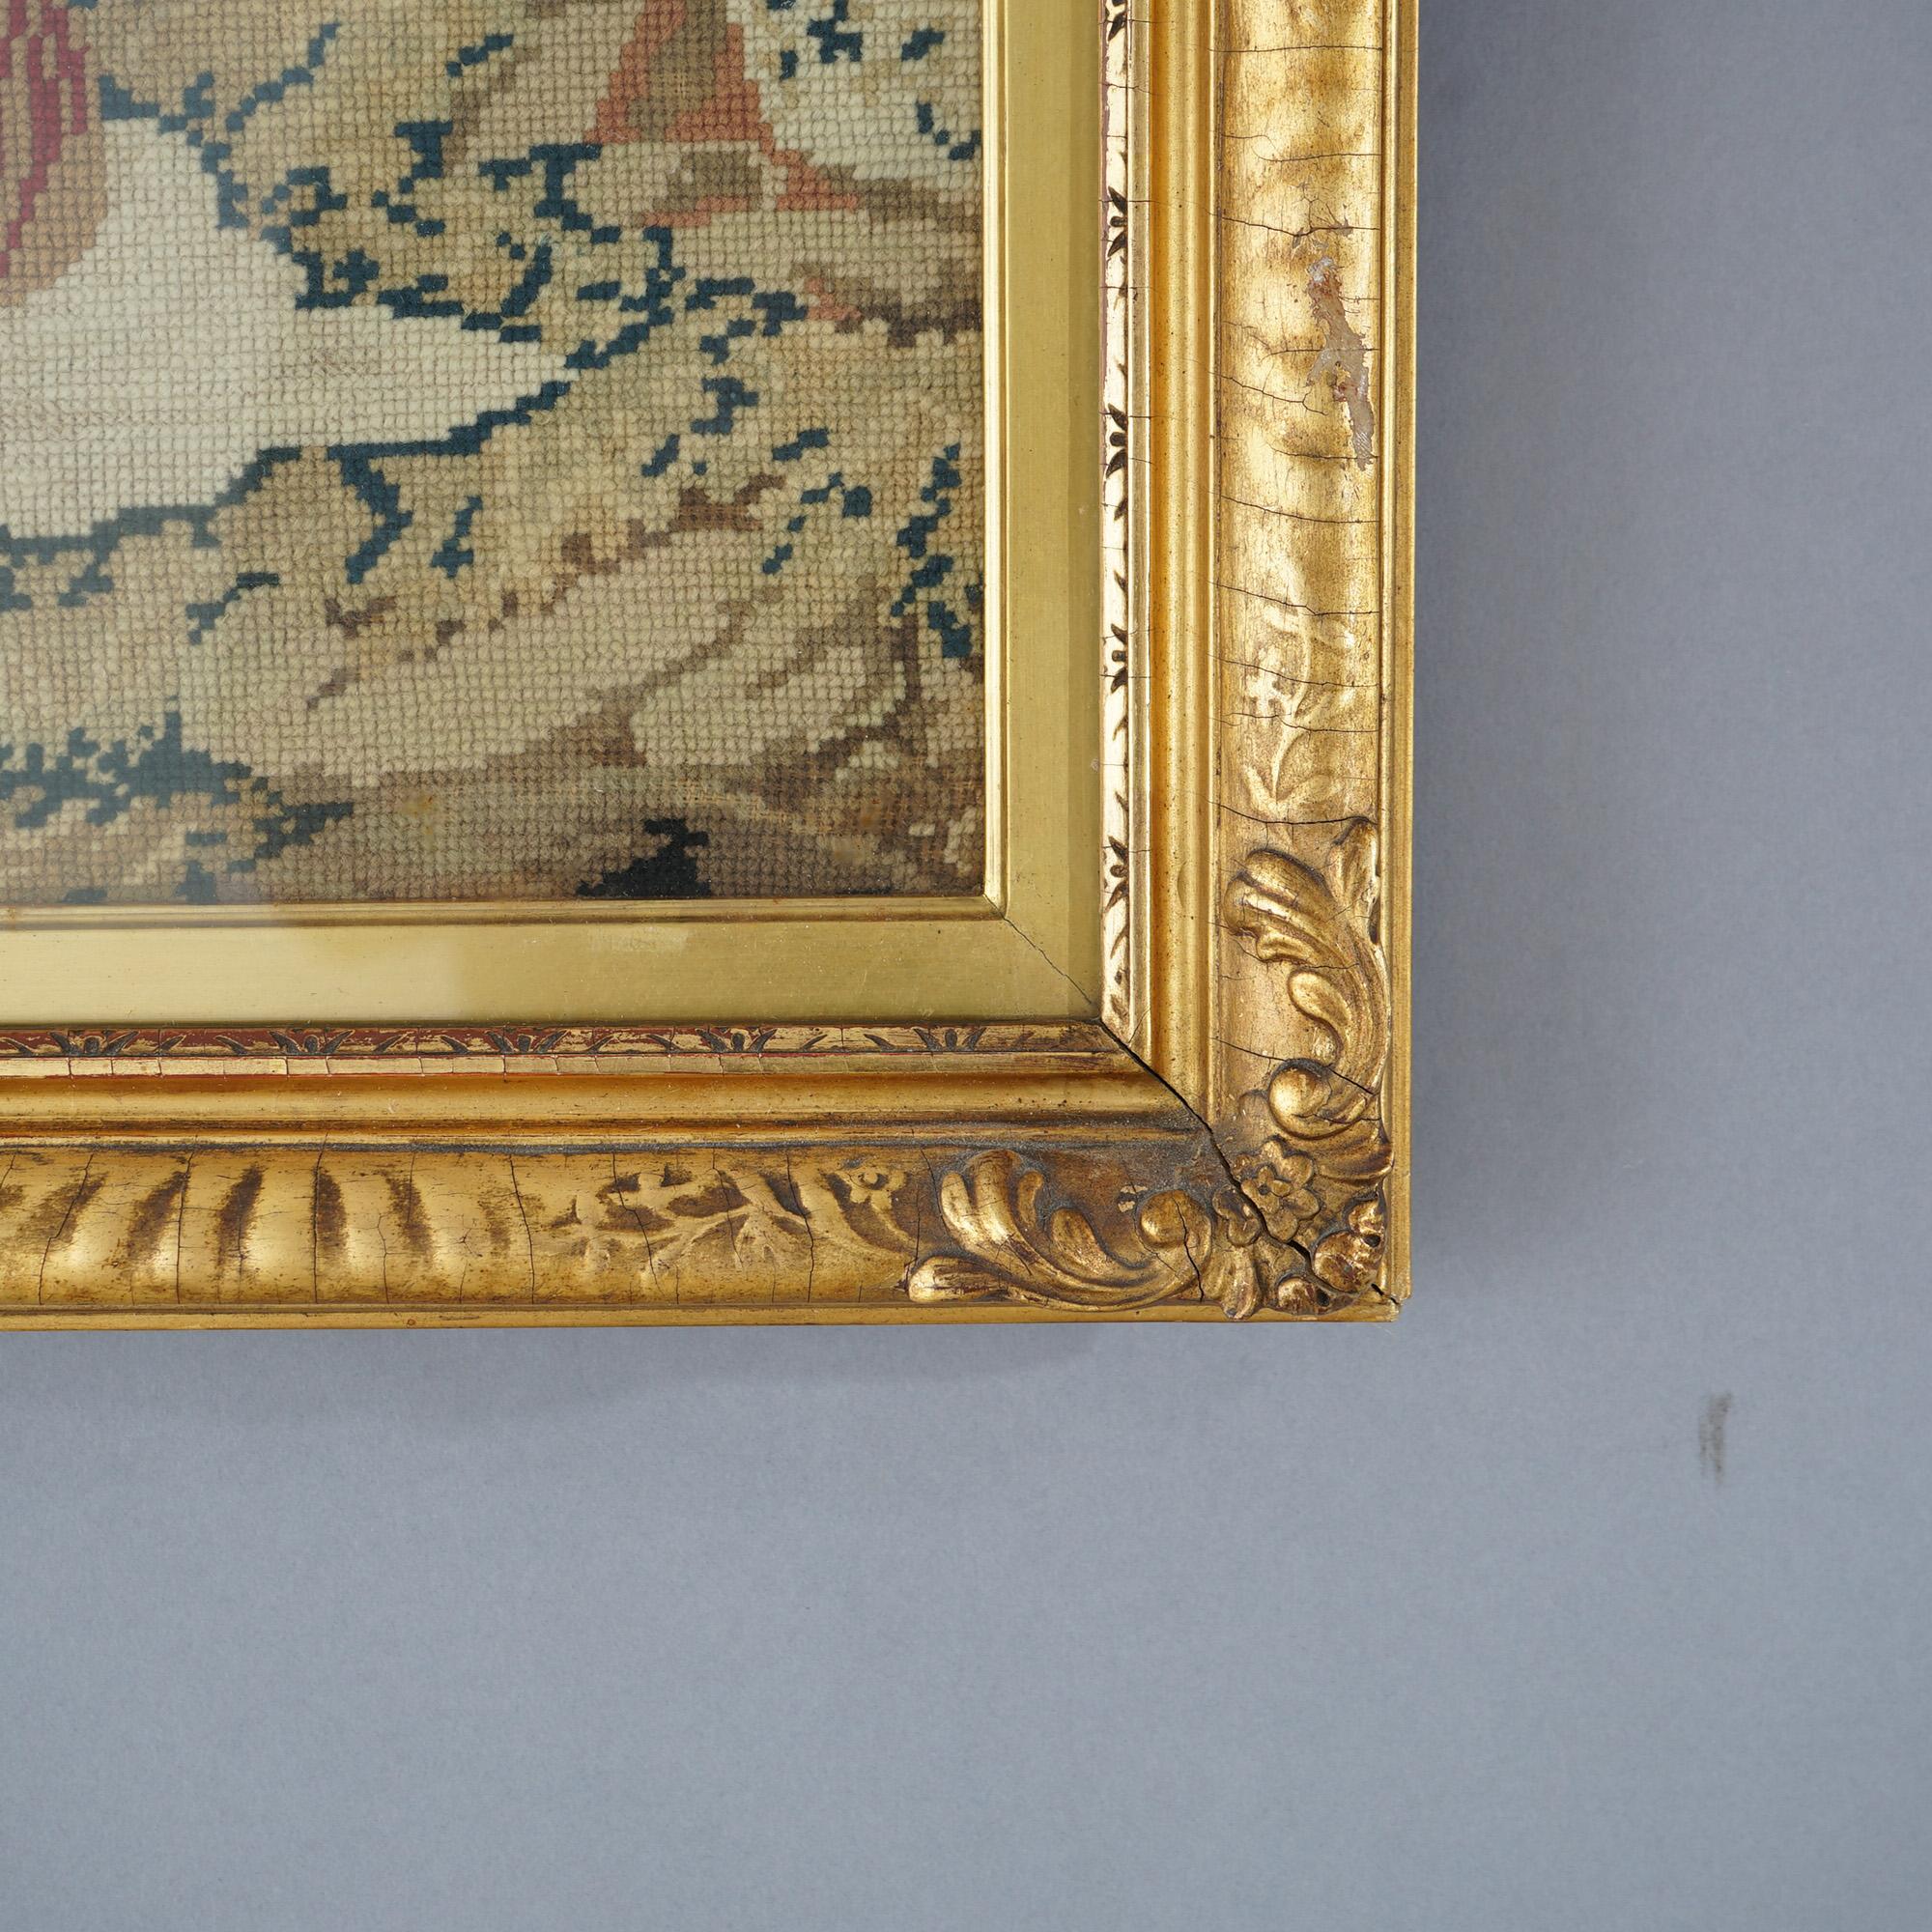 20th Century Antique Victorian Scene Framed Needlework In Giltwood Frame Circa 1900 For Sale